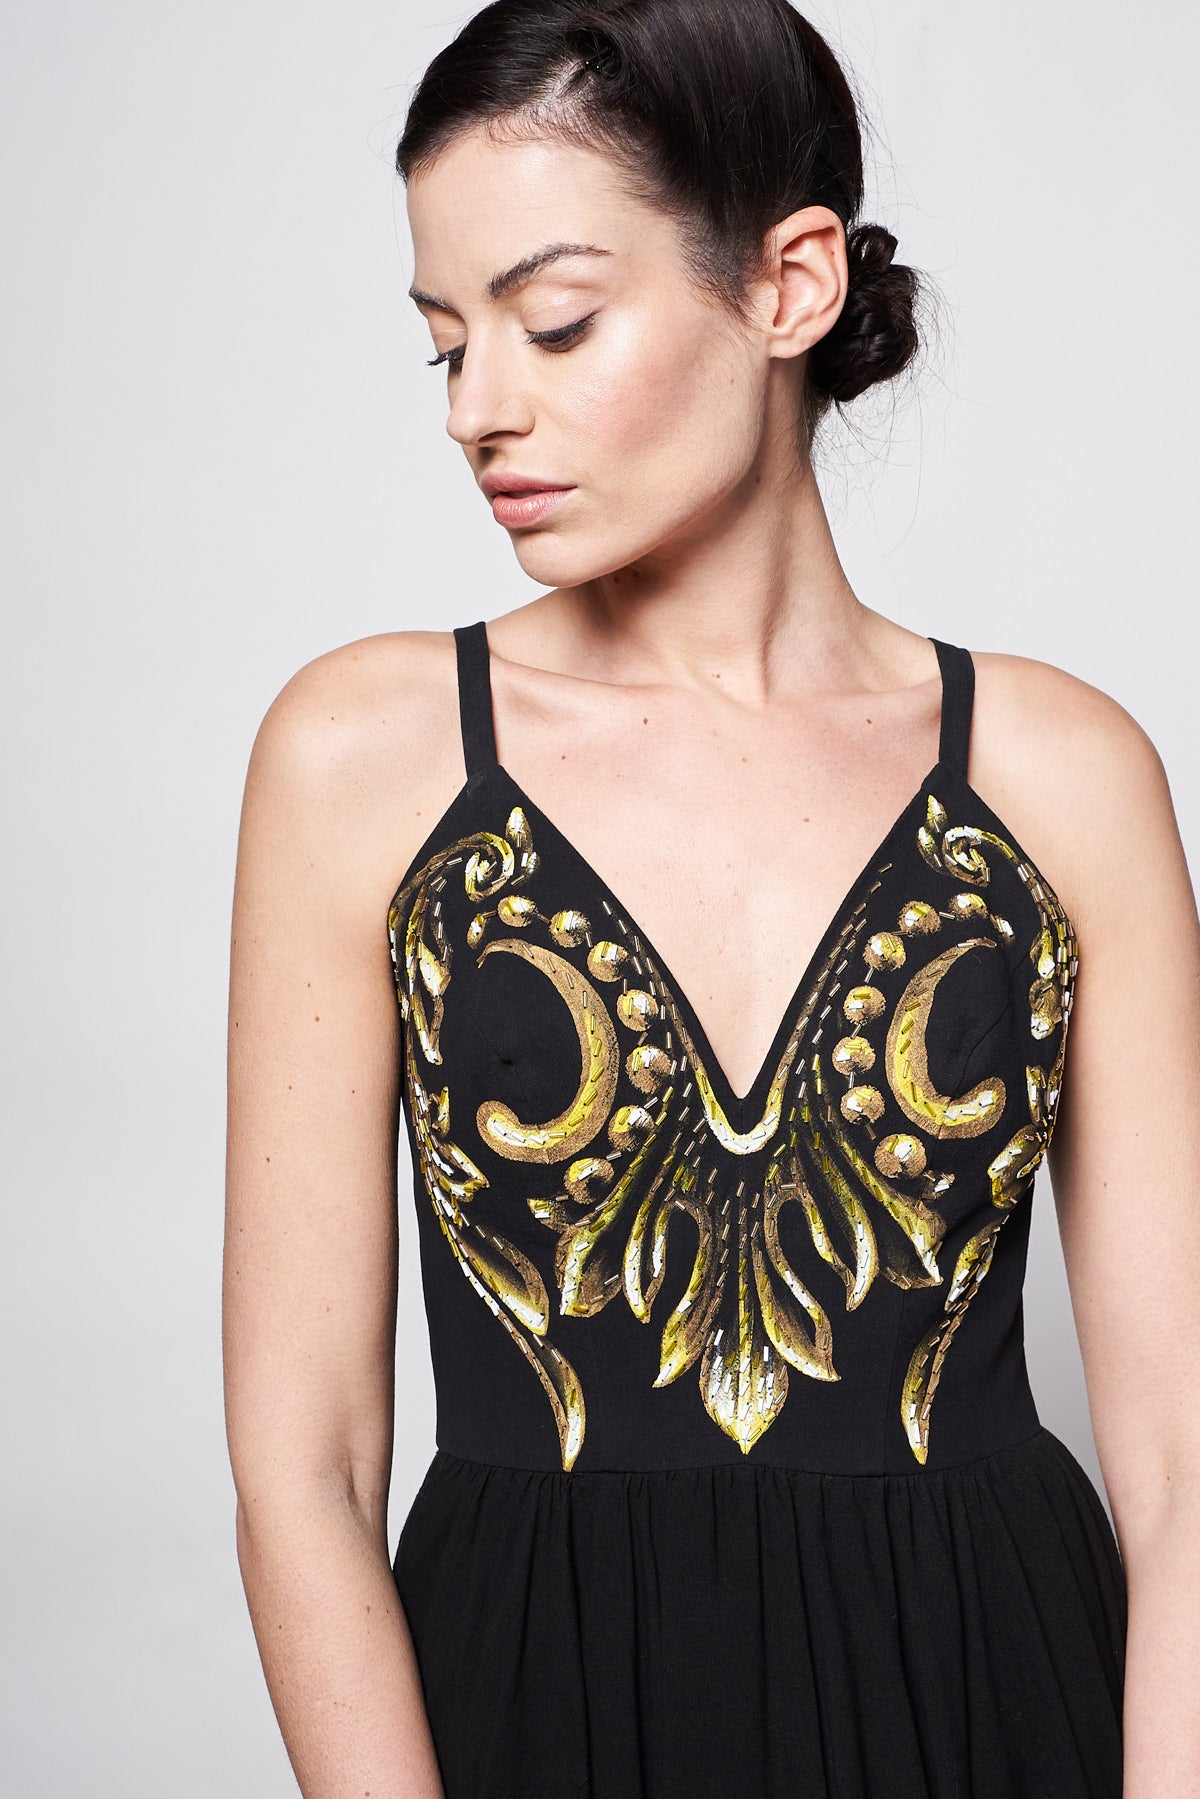 HAND-PAINTED AND HAND-EMBROIDERED LONG DRESS V NECK - TALAVERA ORO